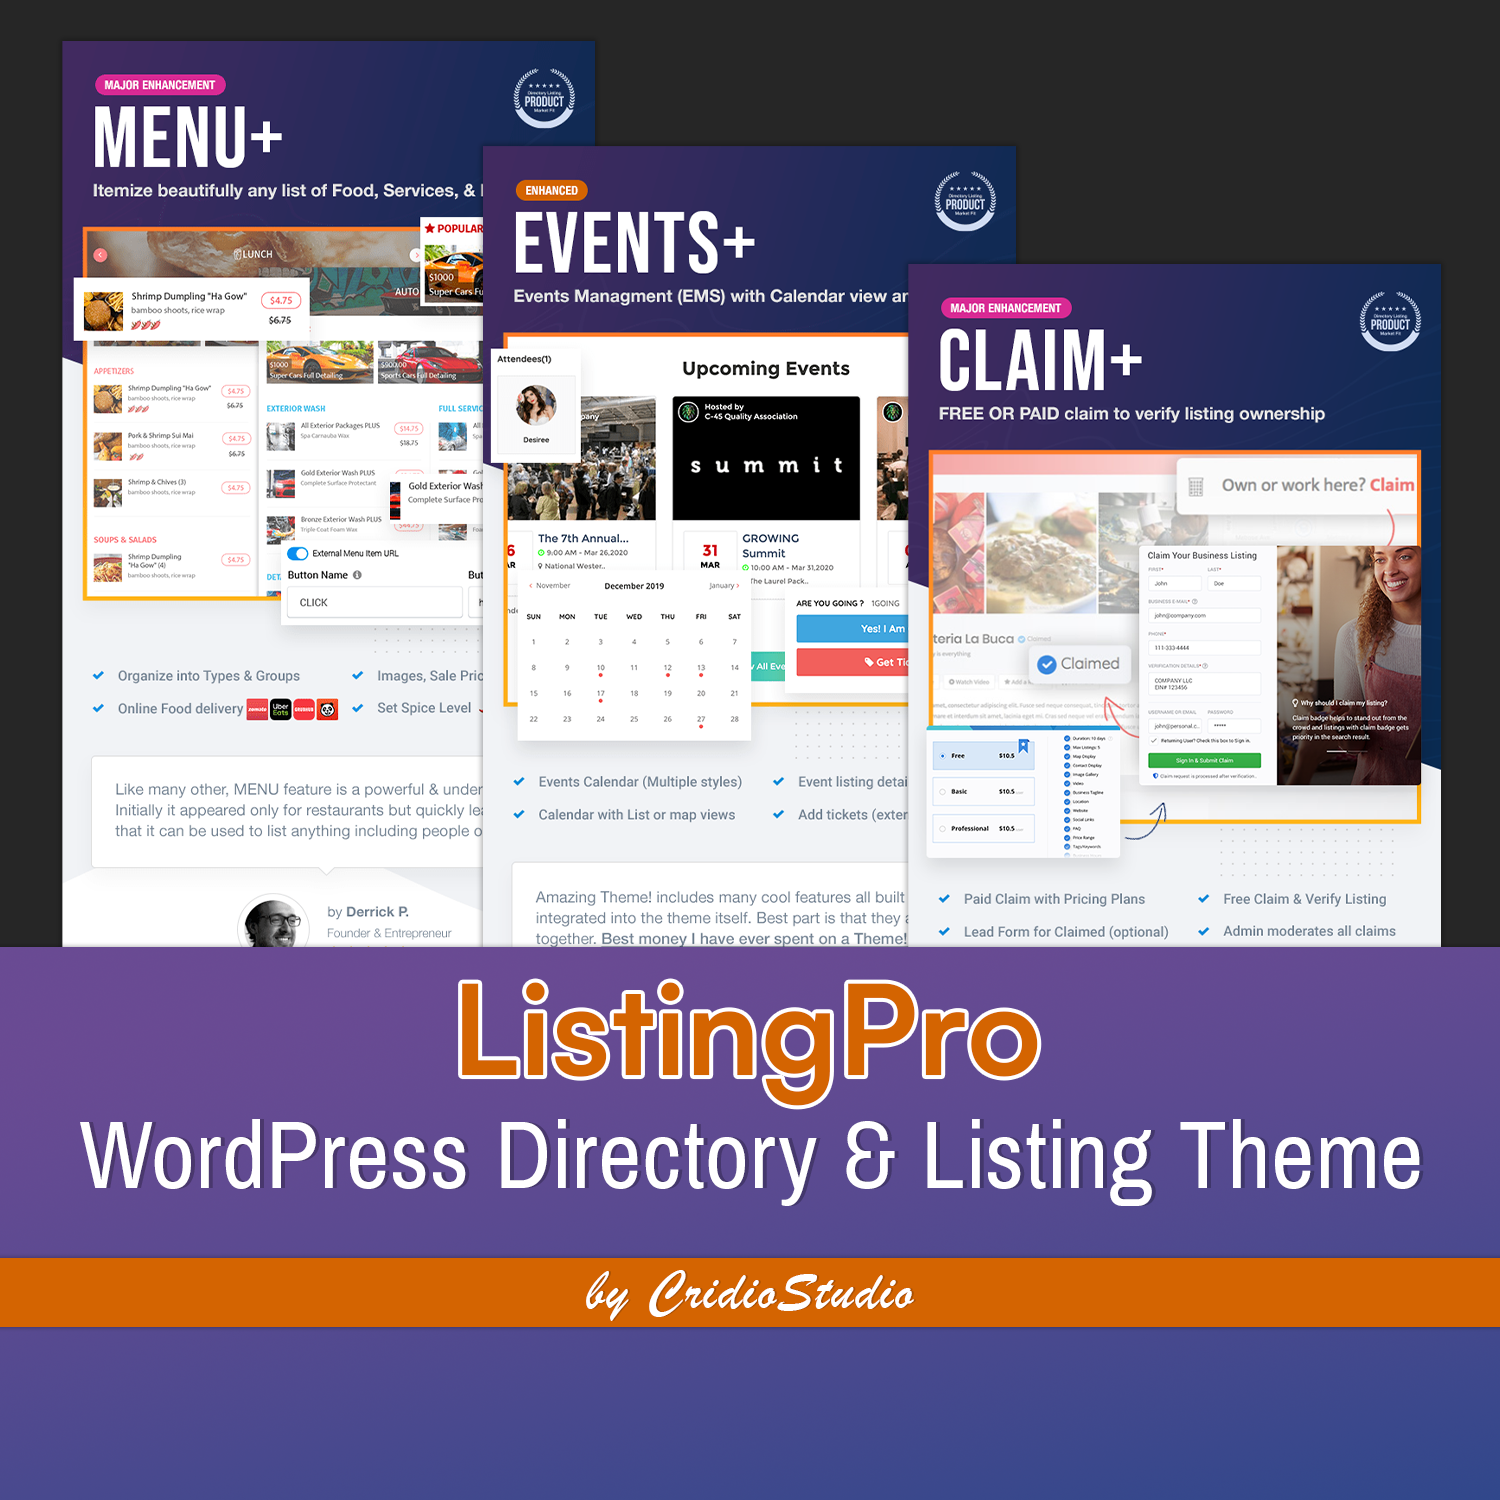 Images with listingpro wordpress directory listing theme.